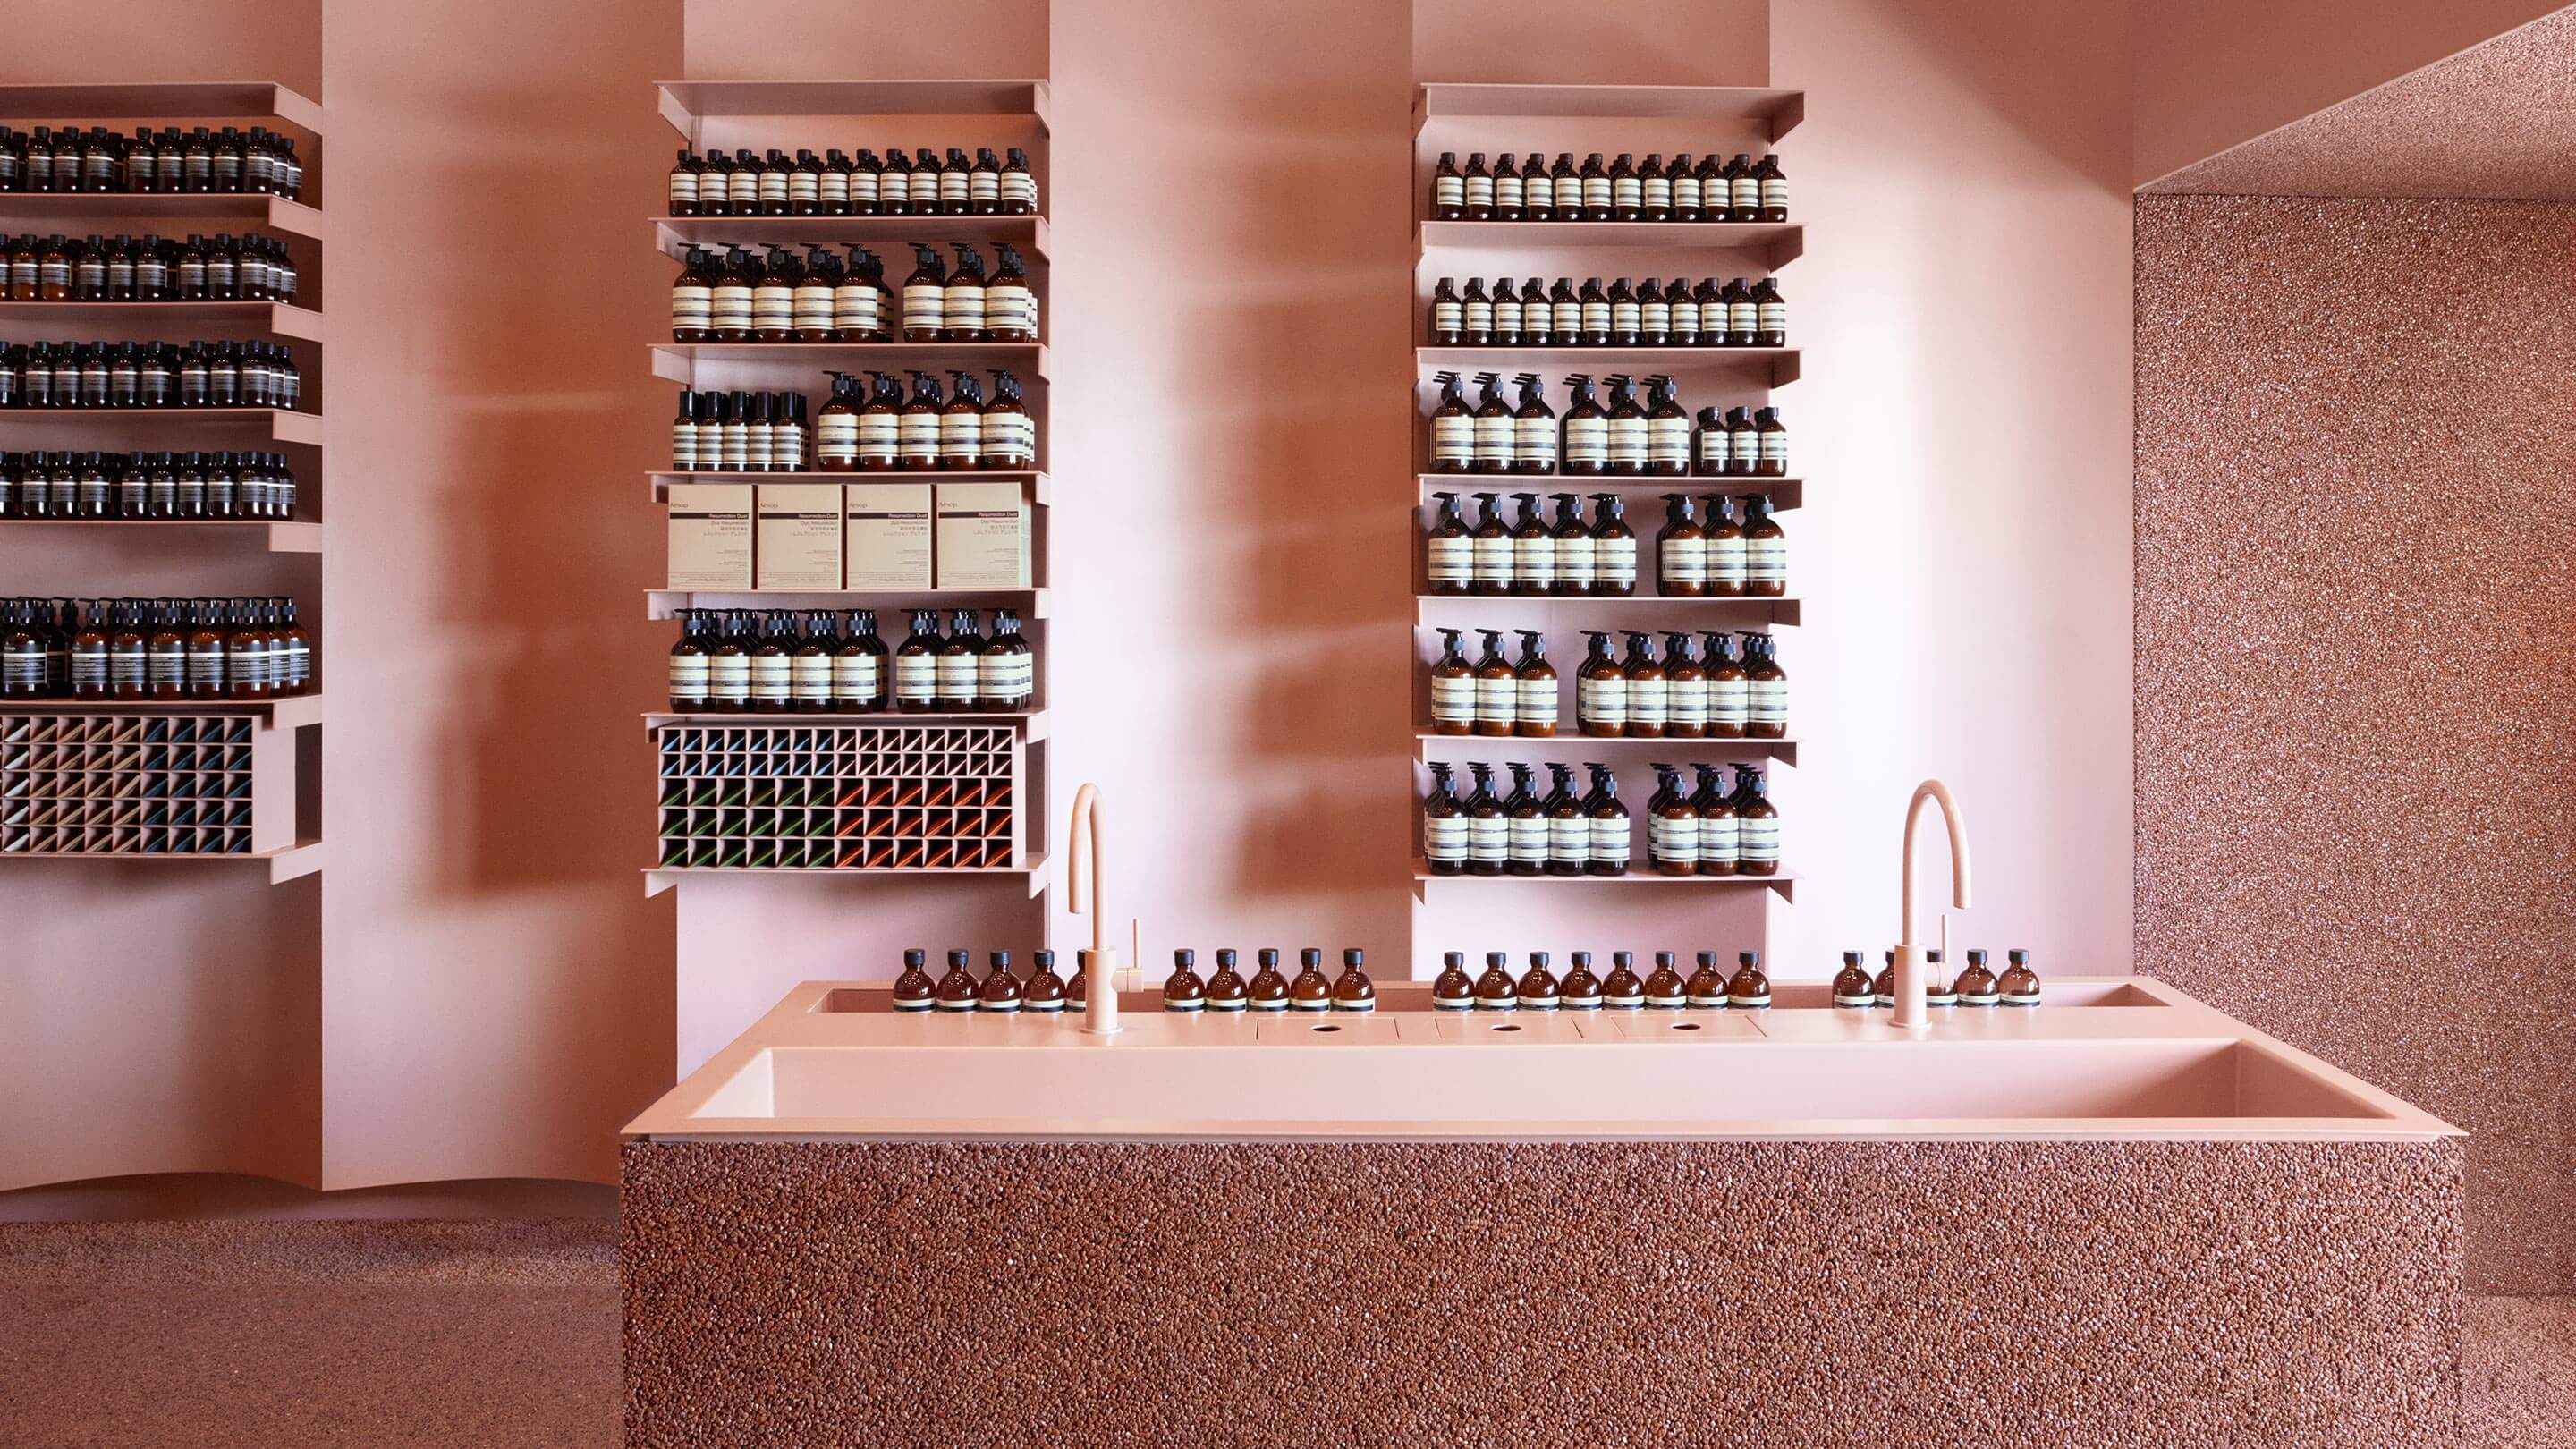 Salmon pink shelves holding rows of Aesop product; speckled pink sinks sit in-front. 